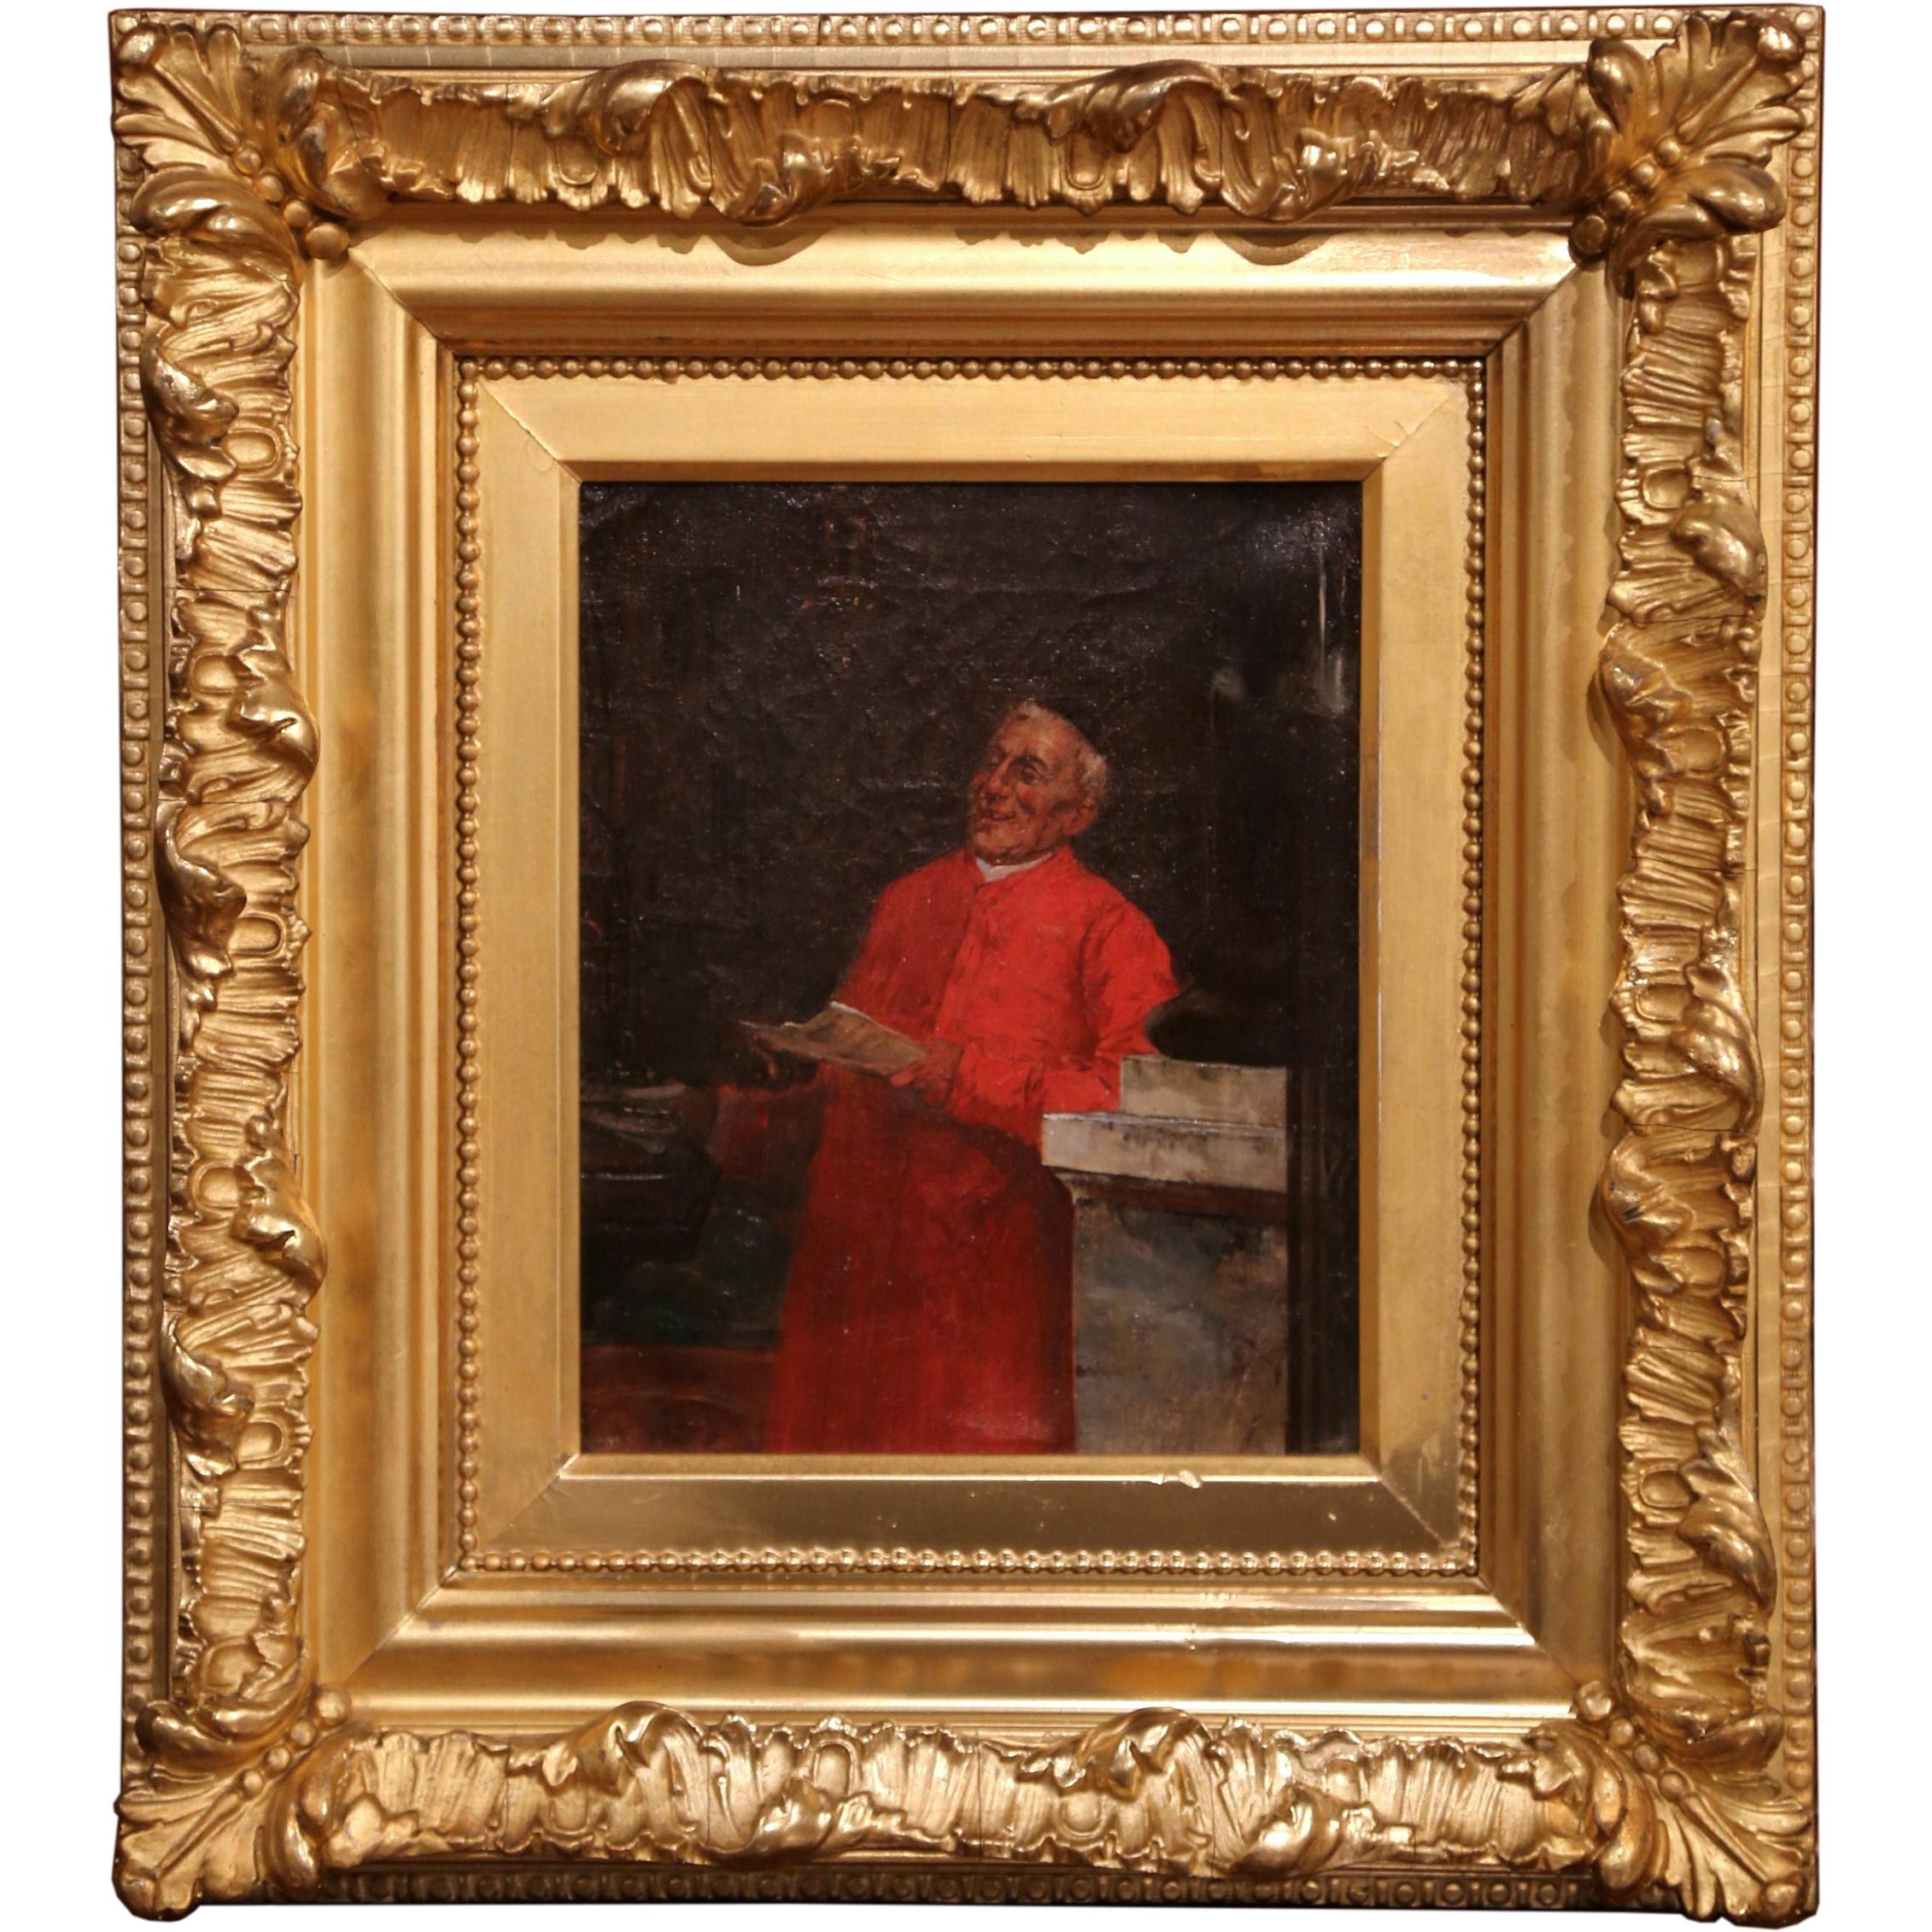 Unknown Figurative Painting - 19th Century French Oil on Canvas Priest Painting in Gilt Frame